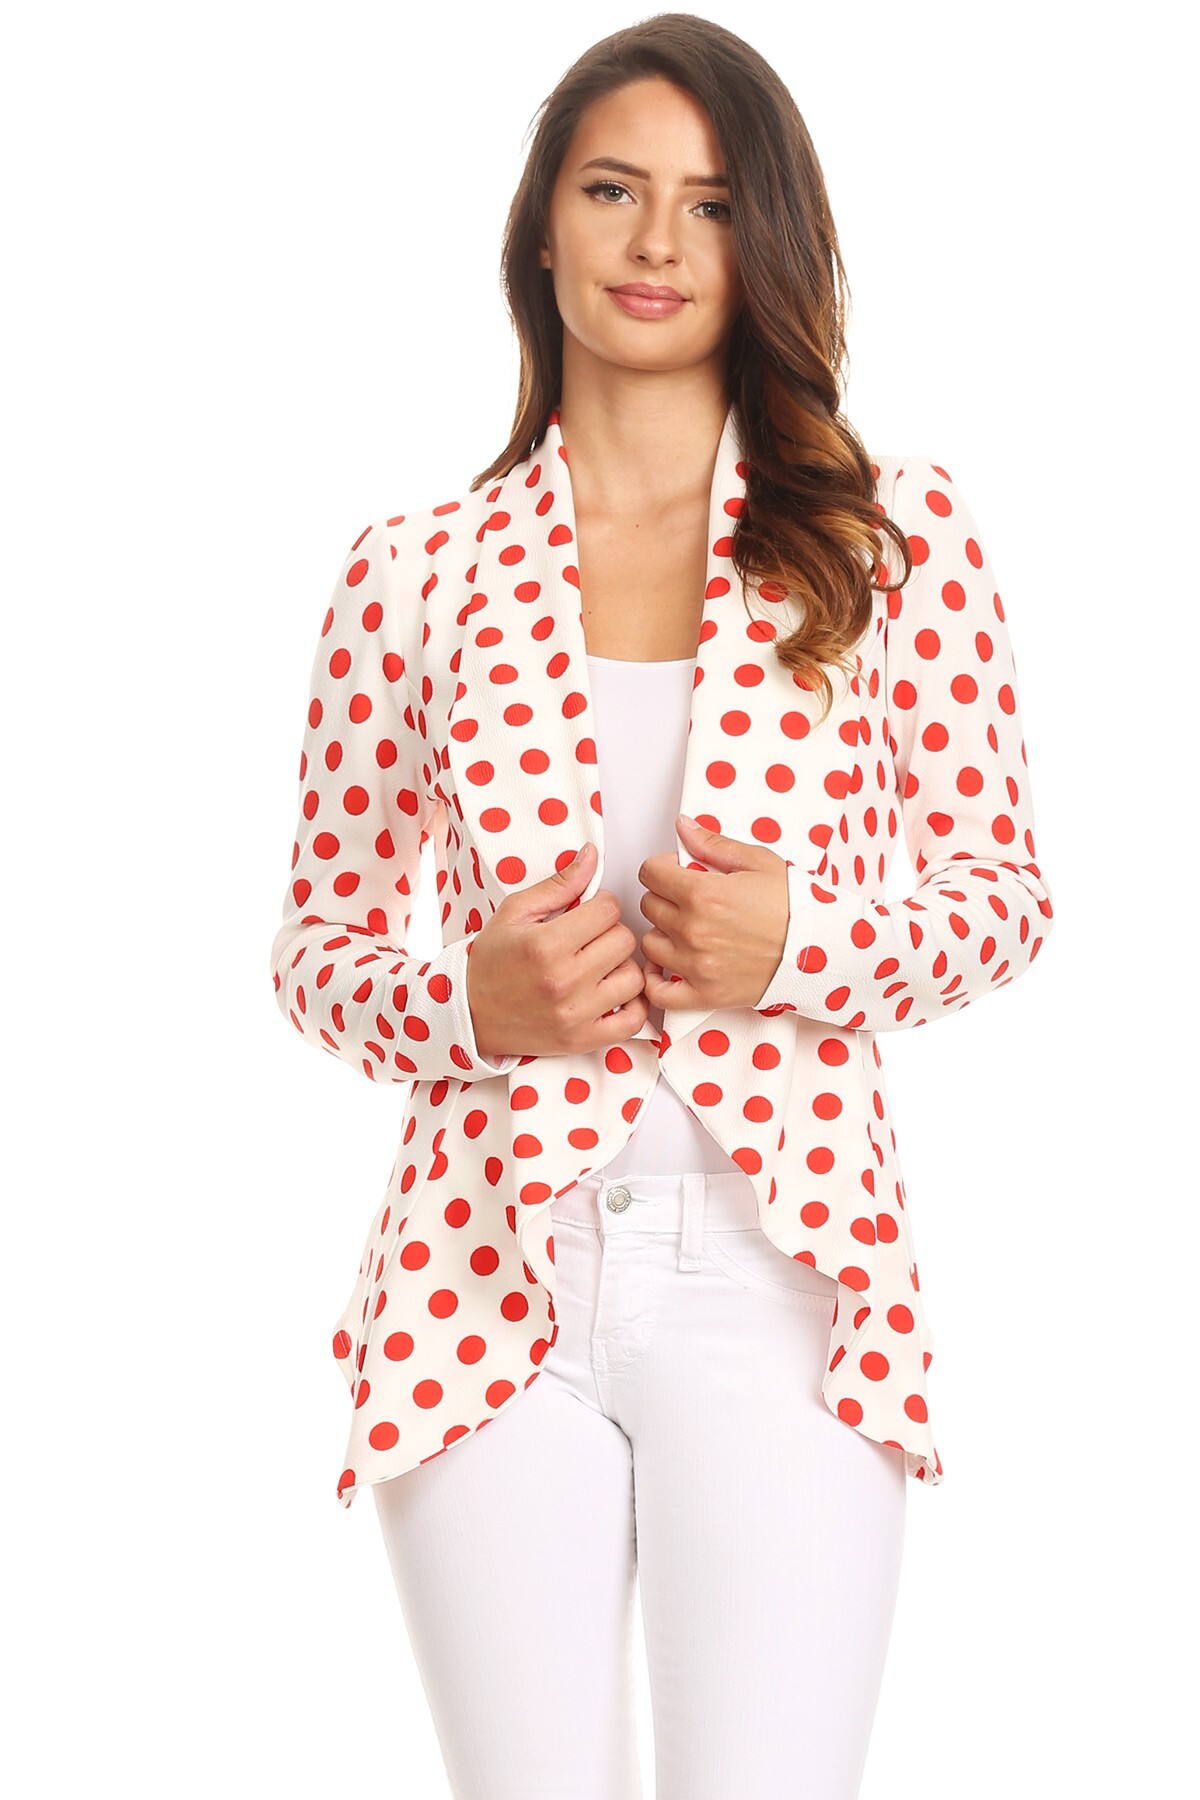 Selected Color is Medium Polka White Red